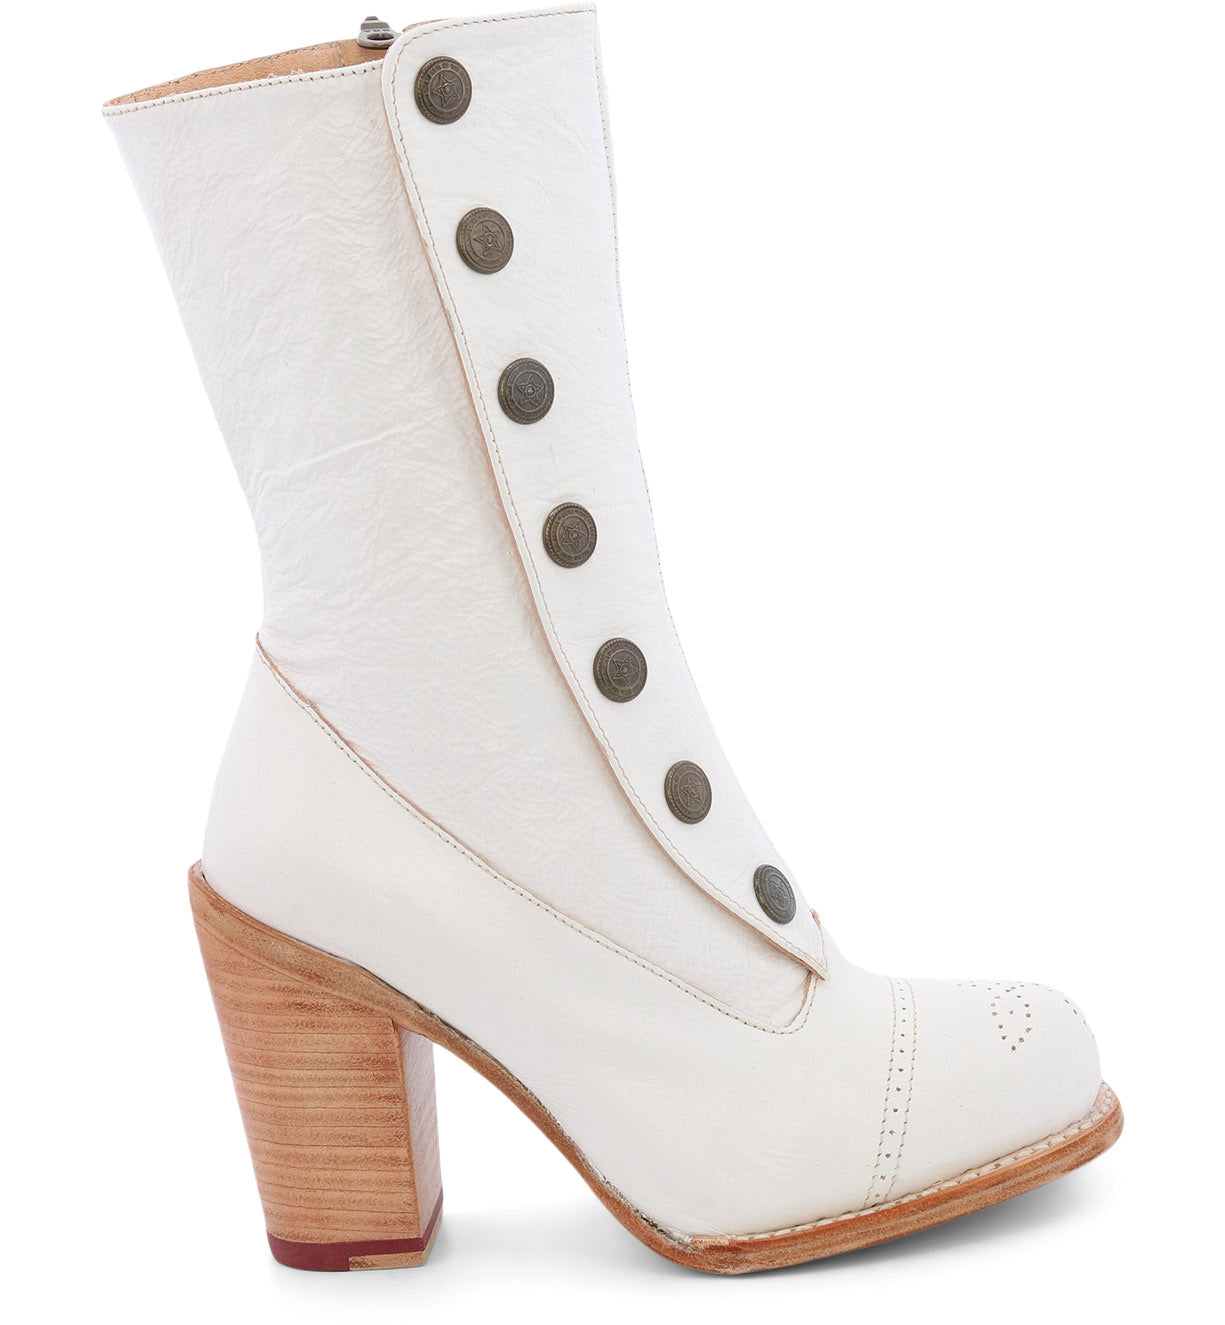 An Oak Tree Farms women's white ankle boot with wooden buttons in a two-tone color named Amelia.